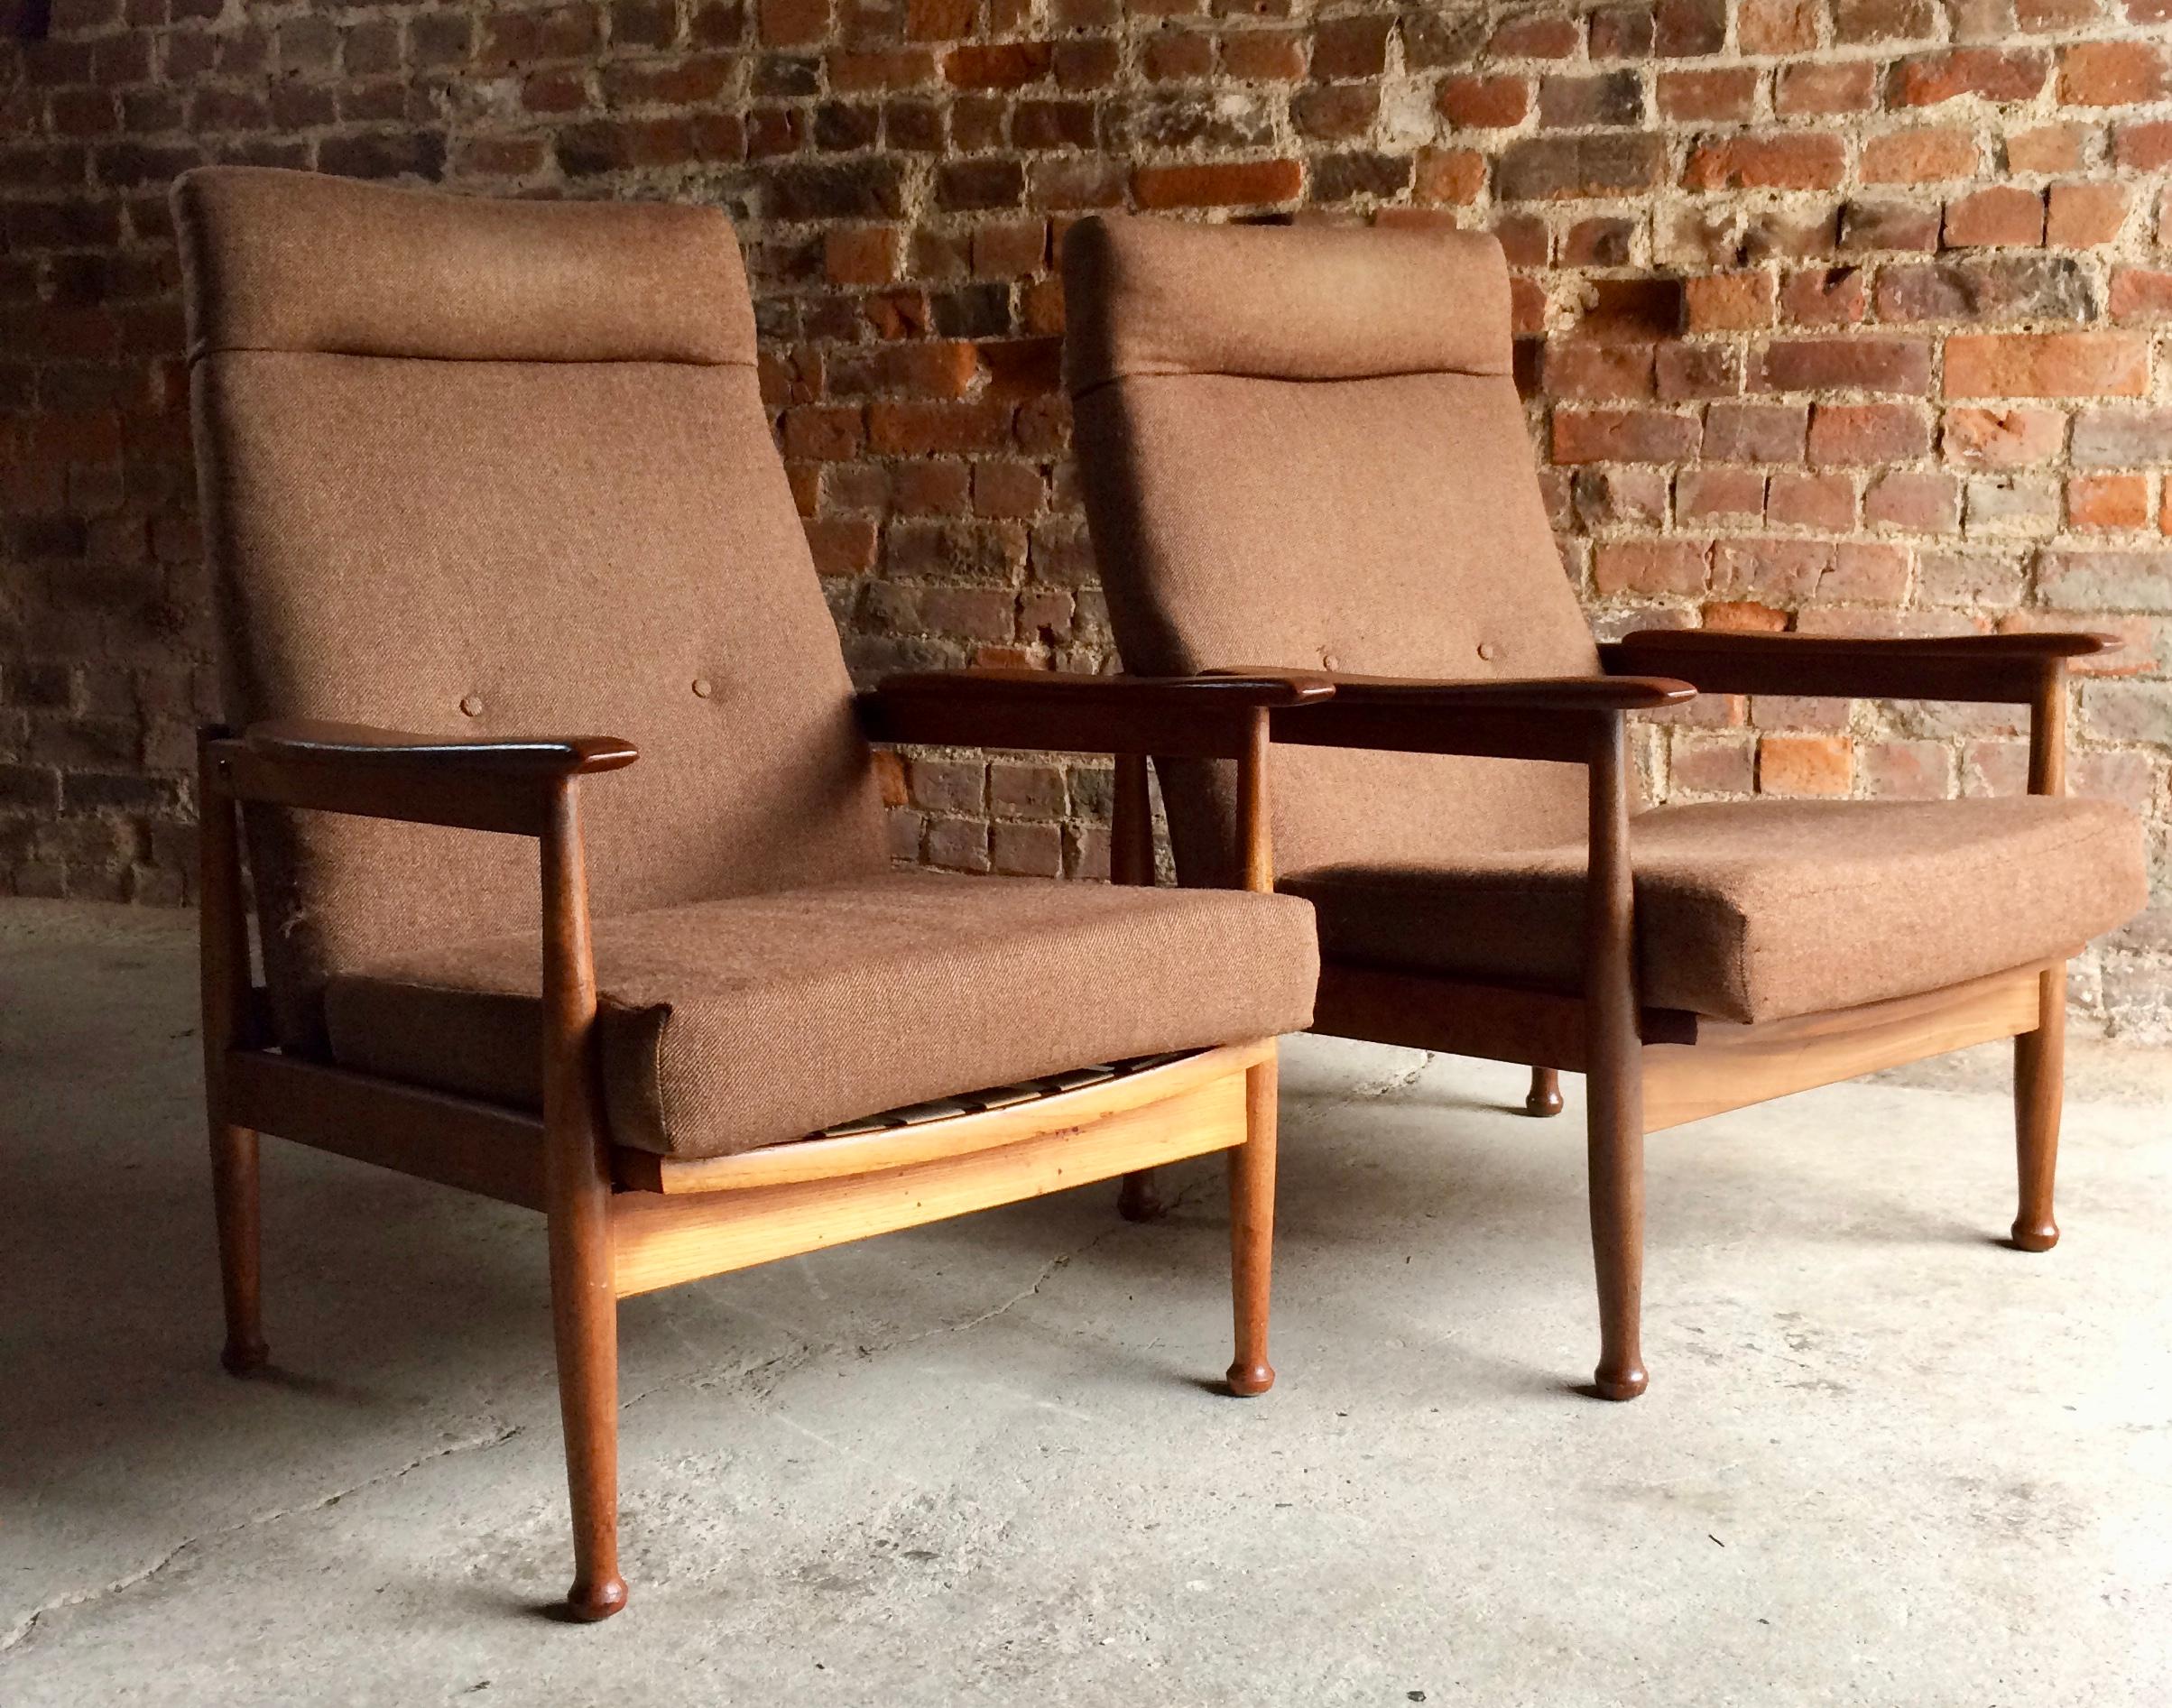 A pair of Guy Rogers Teak Recliner Armchairs, Manhattan Design.

?

?

1960s

Teek

Guy Rogers

Reclining Seat

Pair

Practical & Beautiful 

?

Dimensions per chair:

?

Height: 37” Inches/94cm (Floor to seat 16”